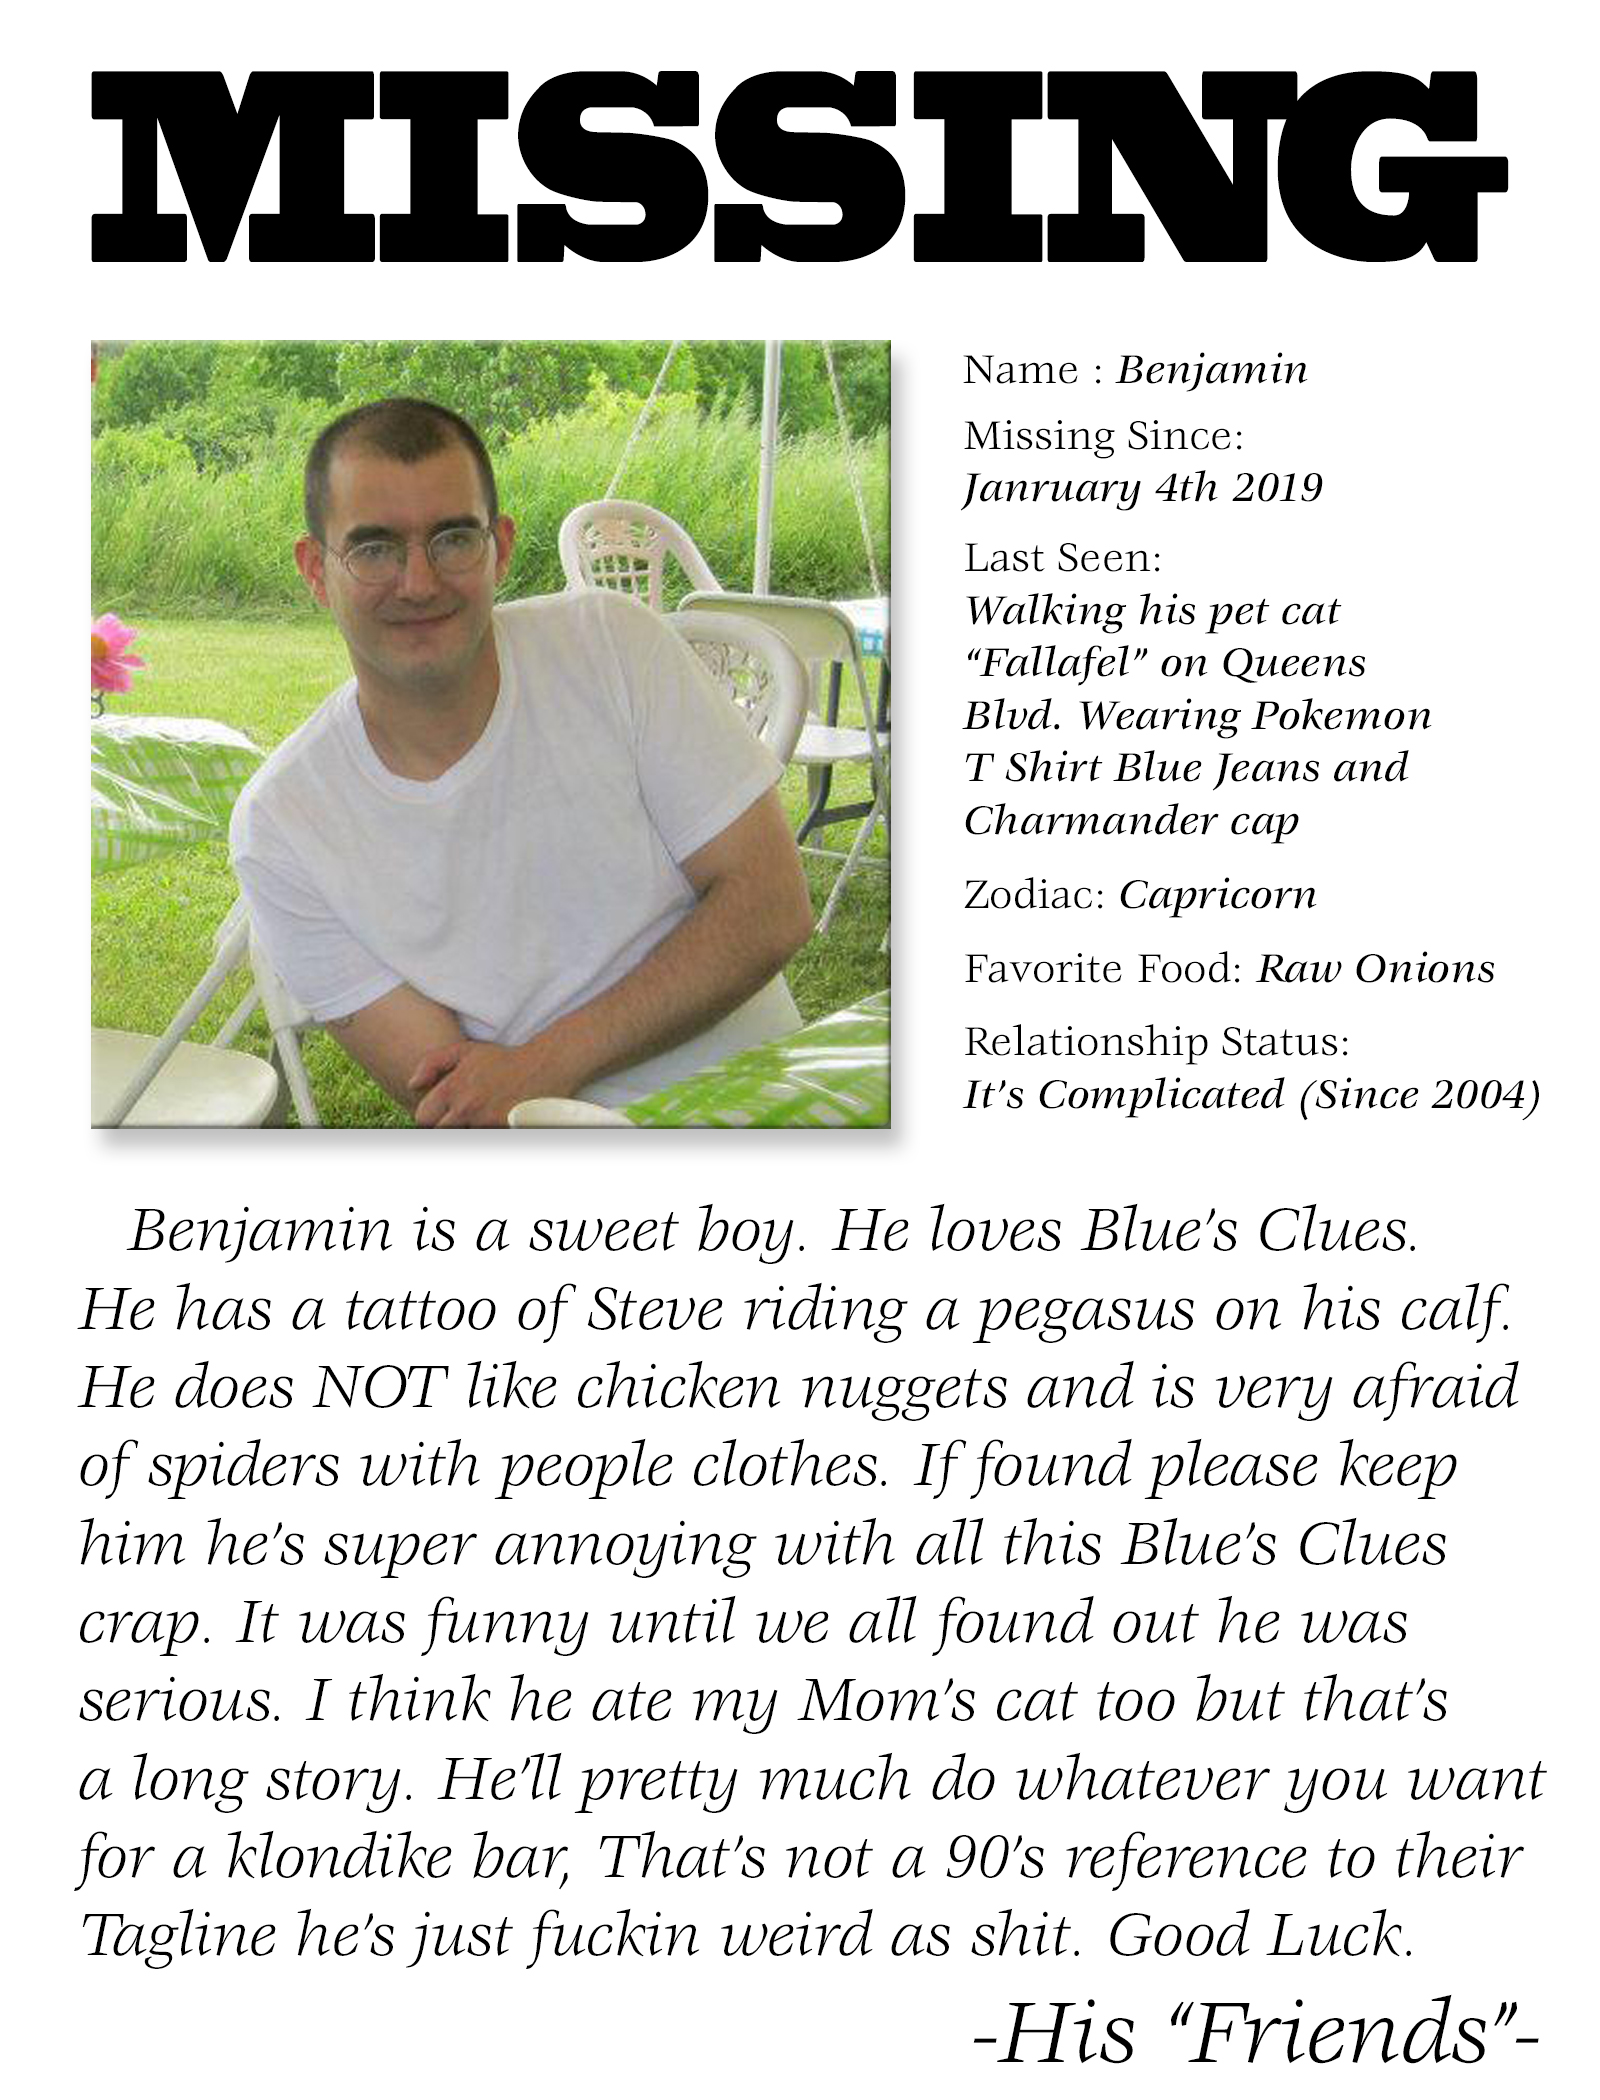 grass - Missing Name Benjamin Missing Since January 4th 2019 Last Seen Walking his per cat "Falafel" on Queens Blud. Wearing Pokemon T Shirt Blue Jeans and Charmander cap Zodiac Capricorn Favorite Food Raw Onions Relationship Status It's Complicated Since